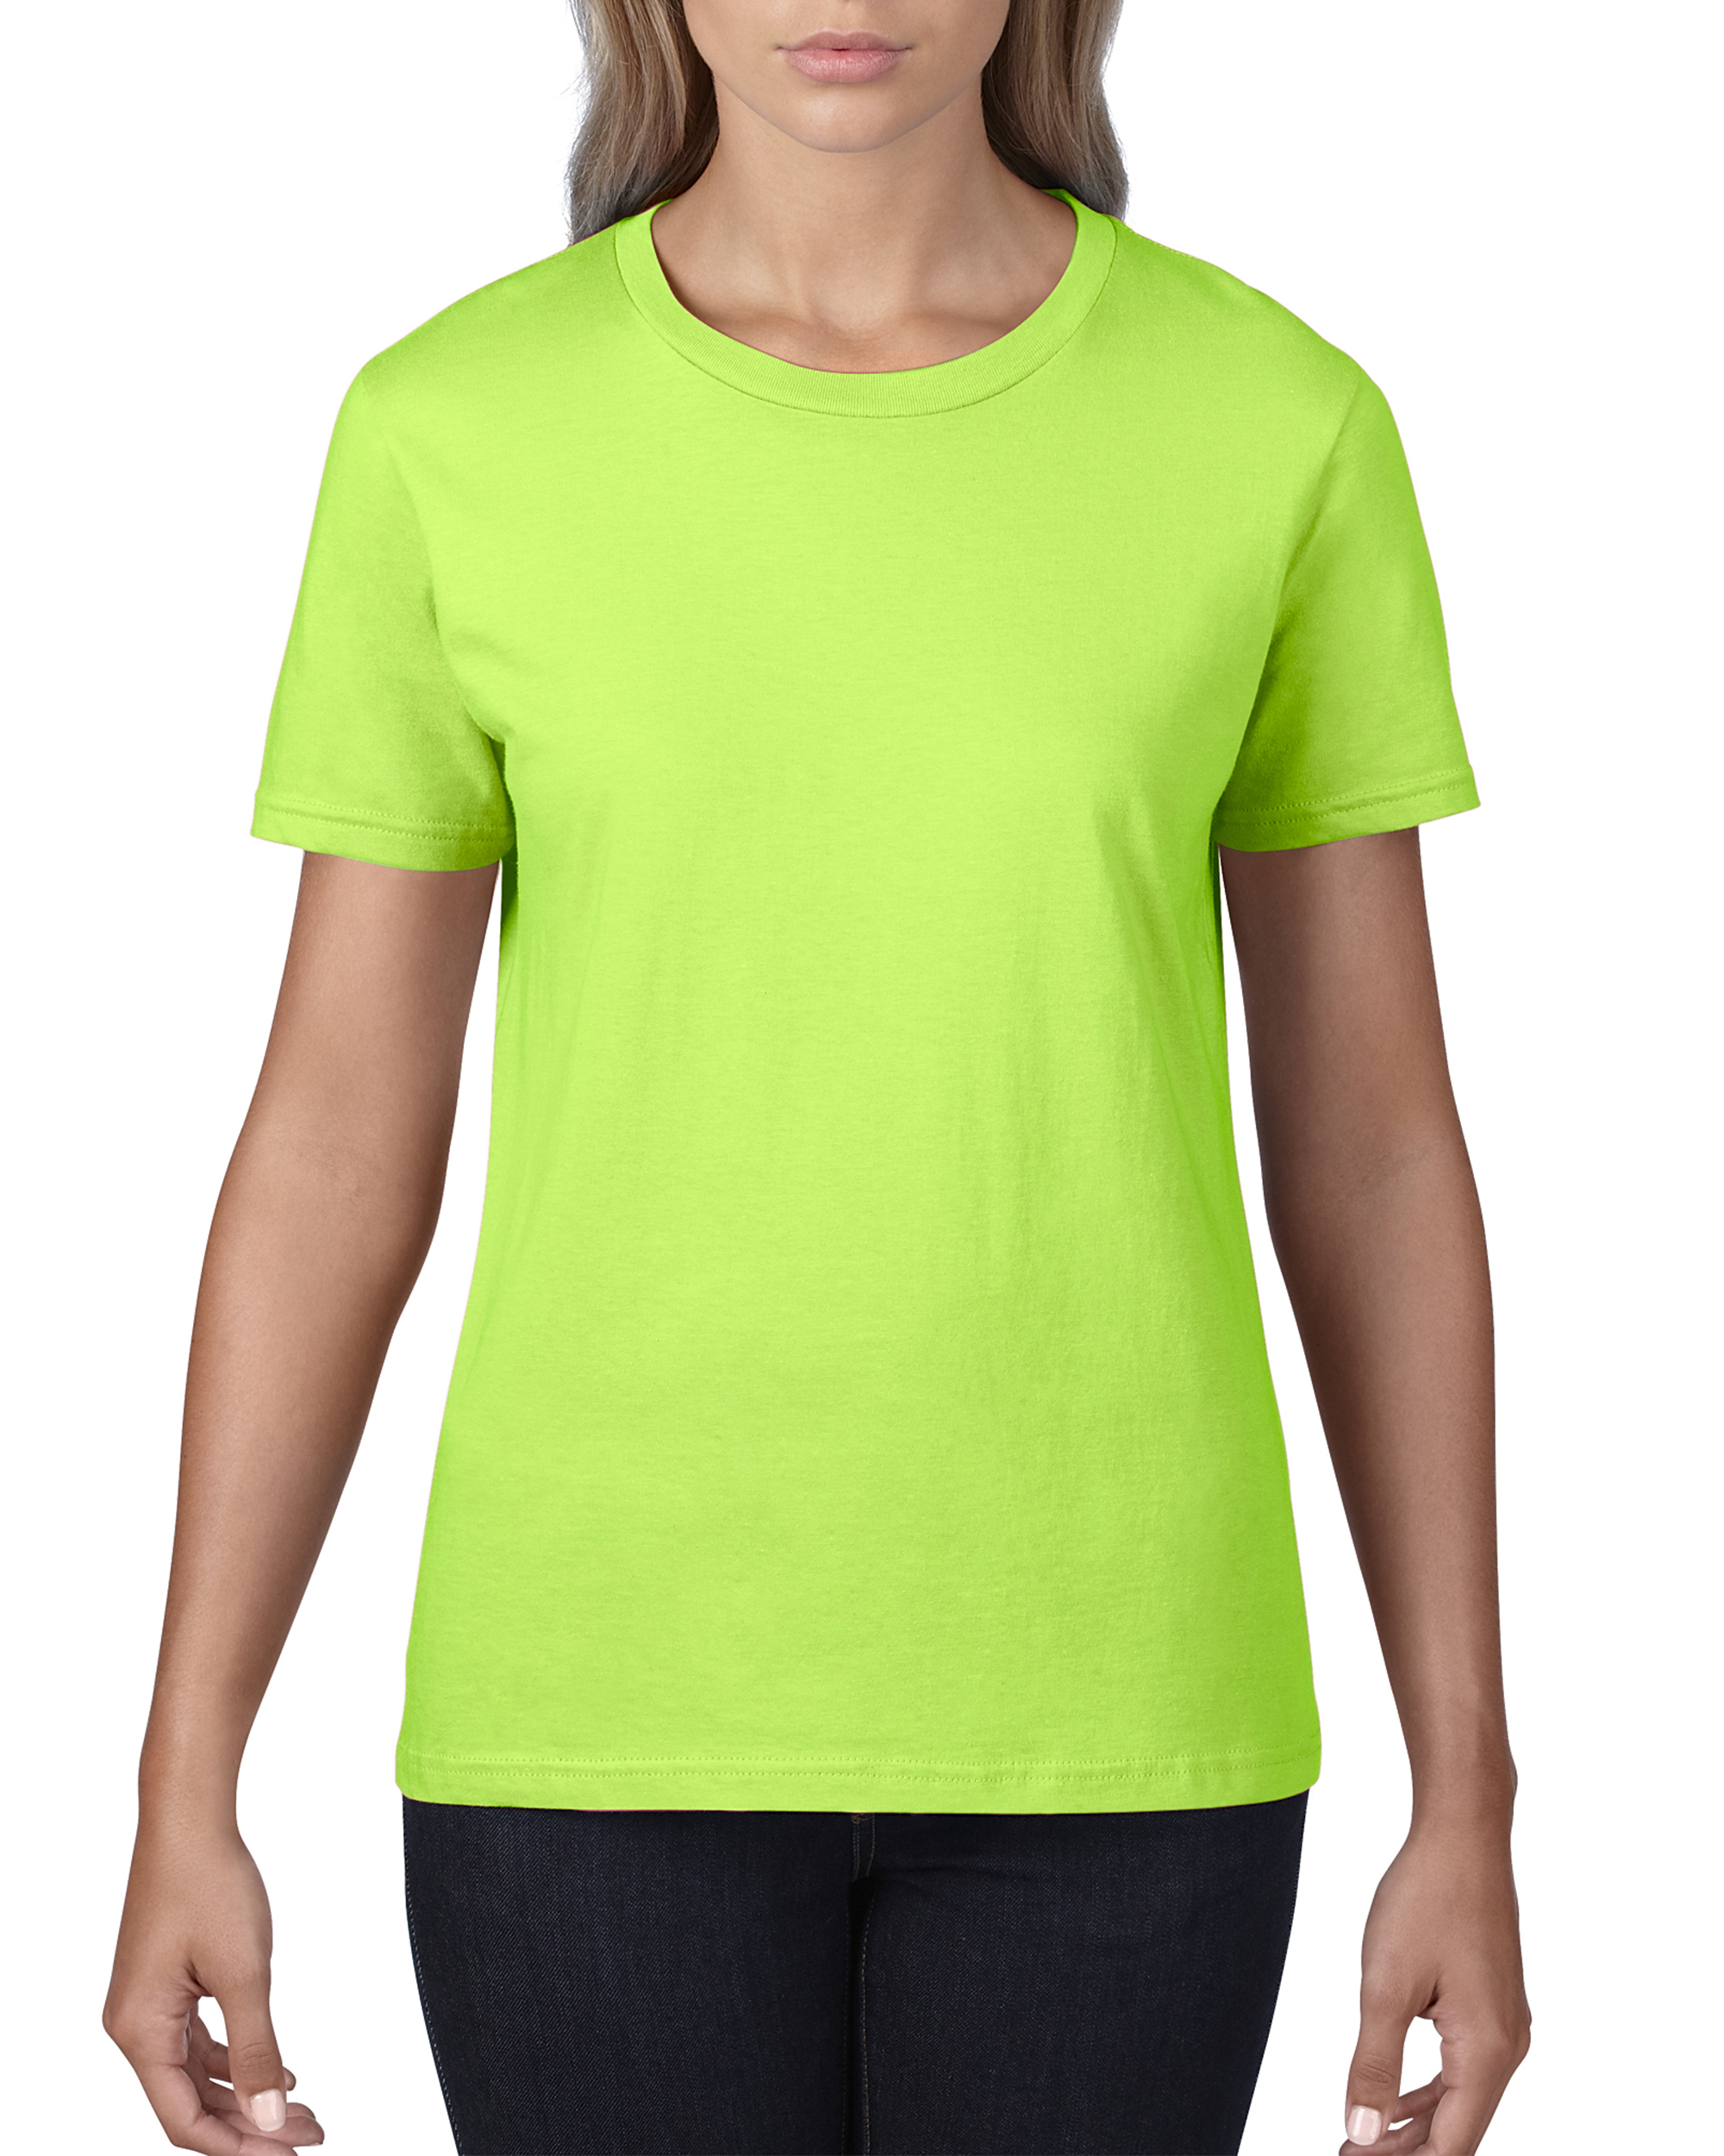 T-shirt Women’s Fashion Basic Tee ANVIL (OUTLET)